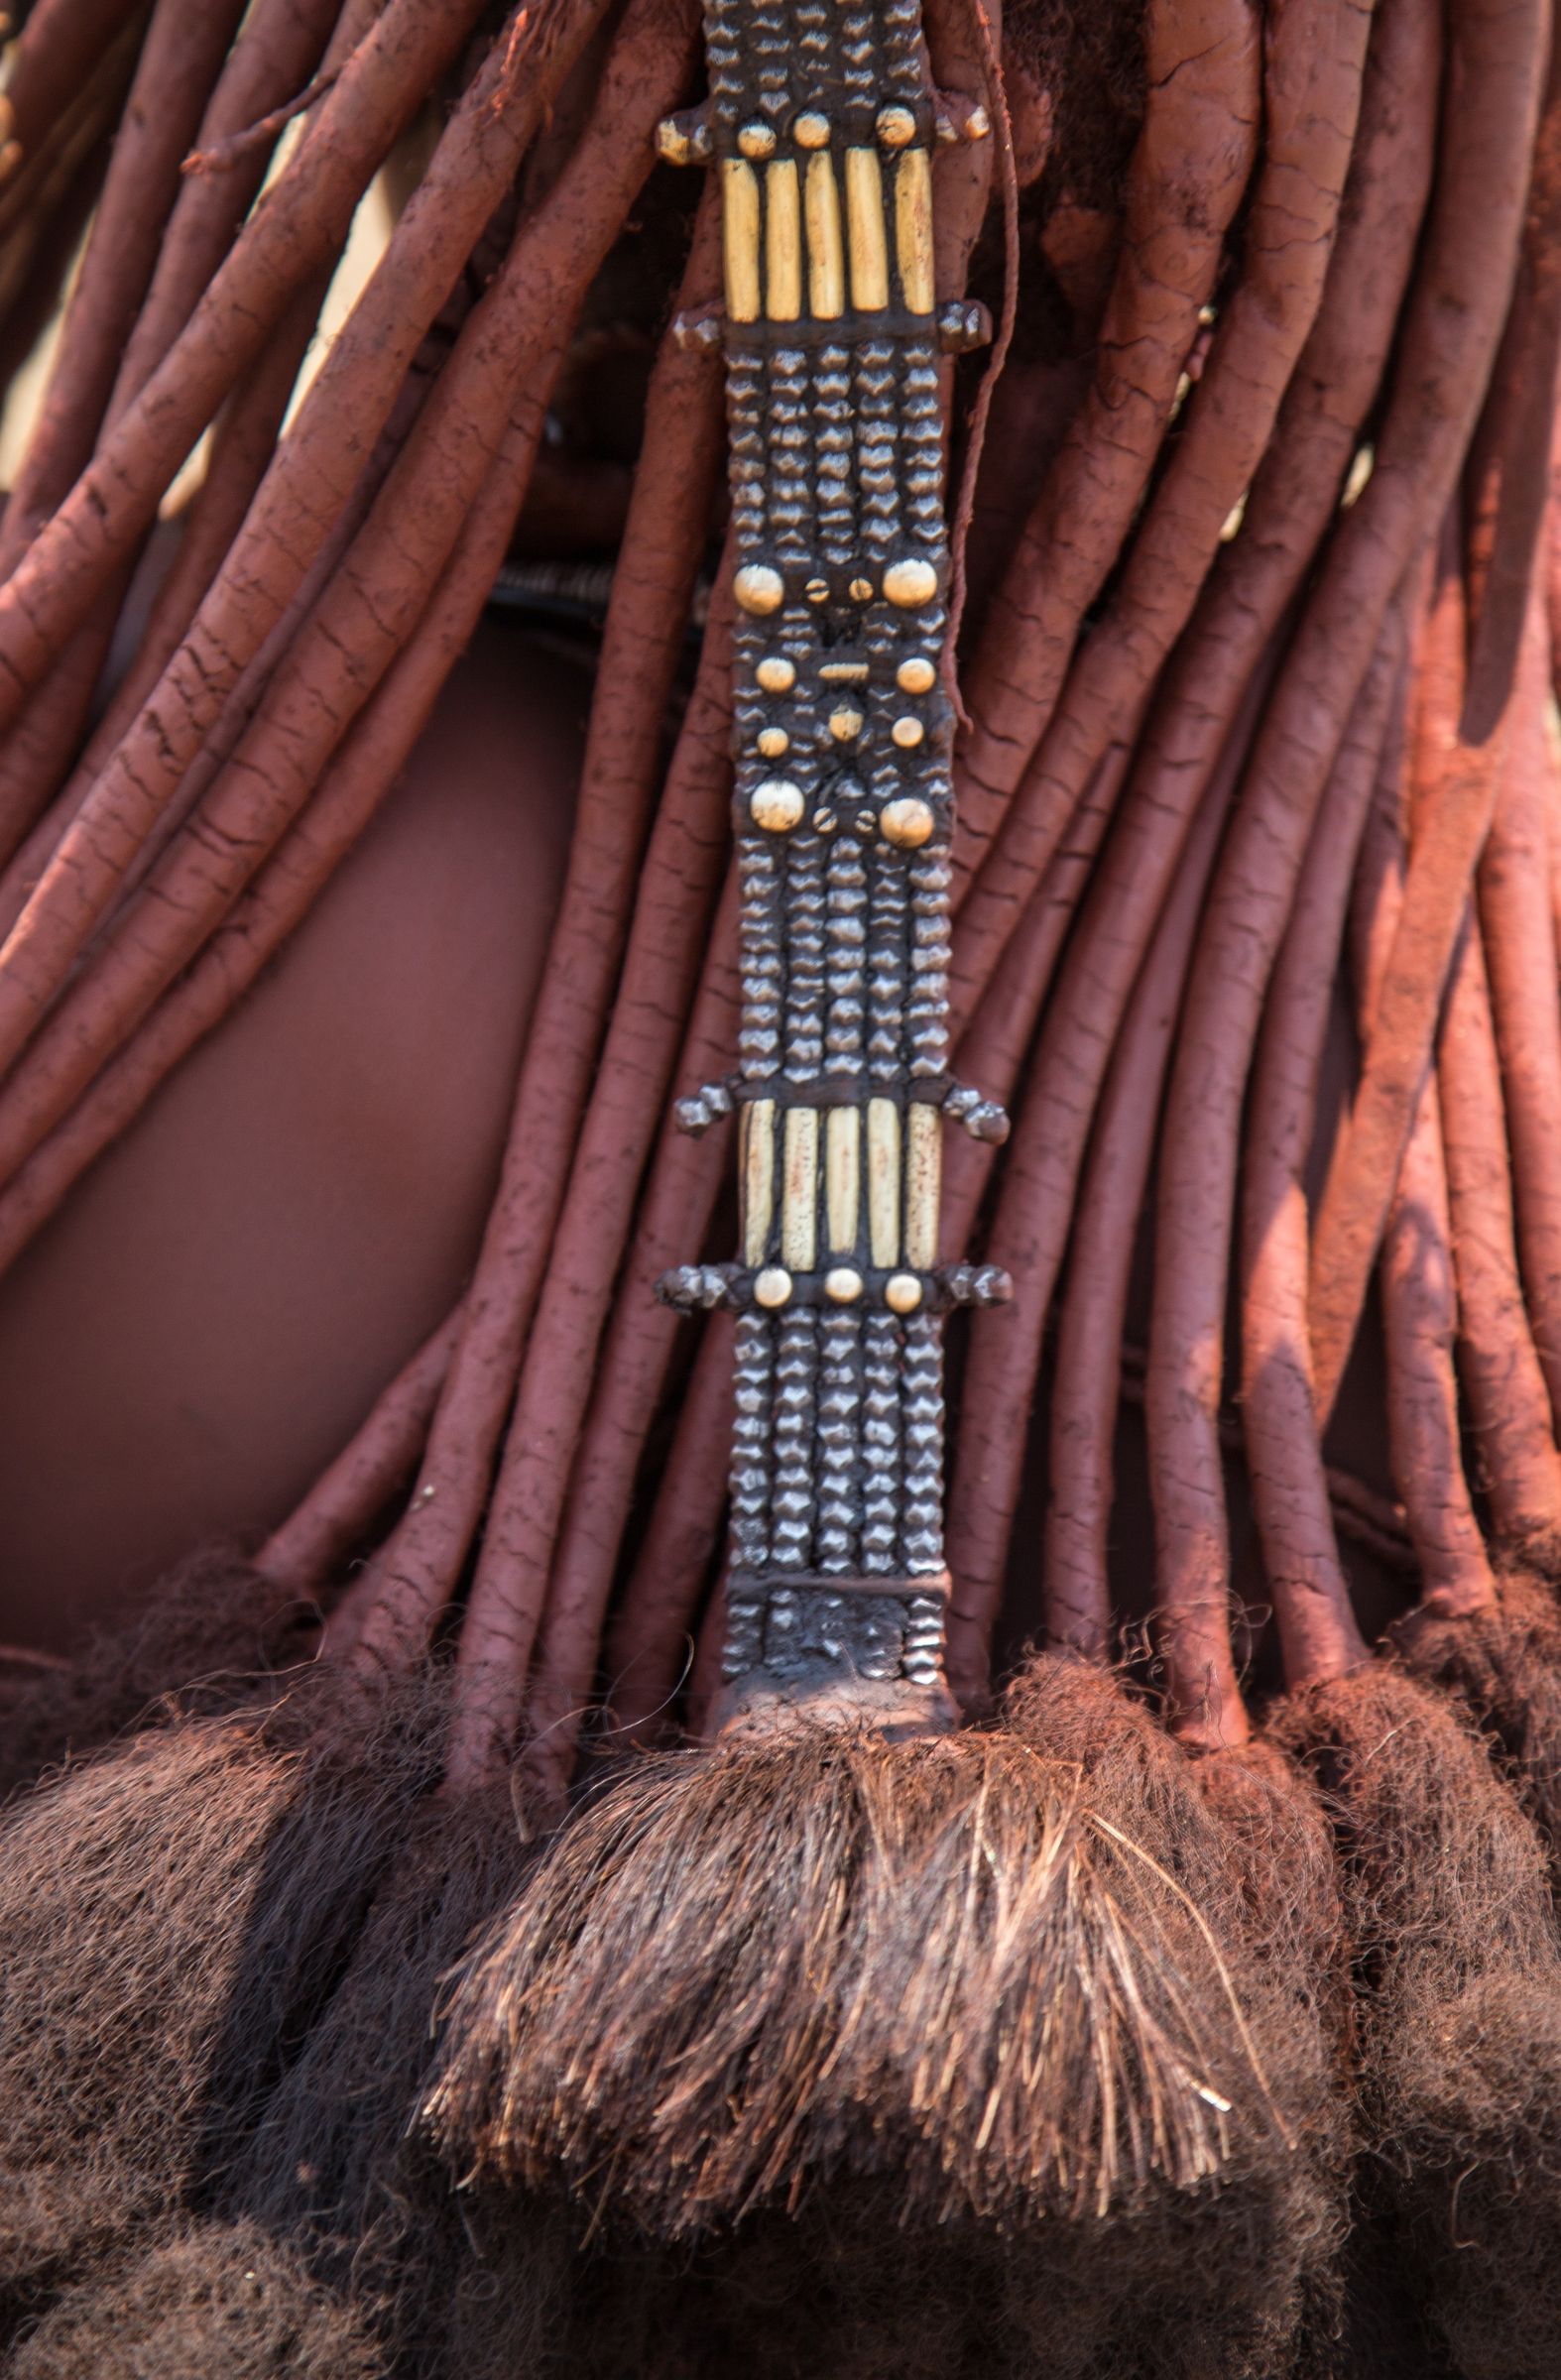 The beautiful hair extensions adorning Himba women in Namibia